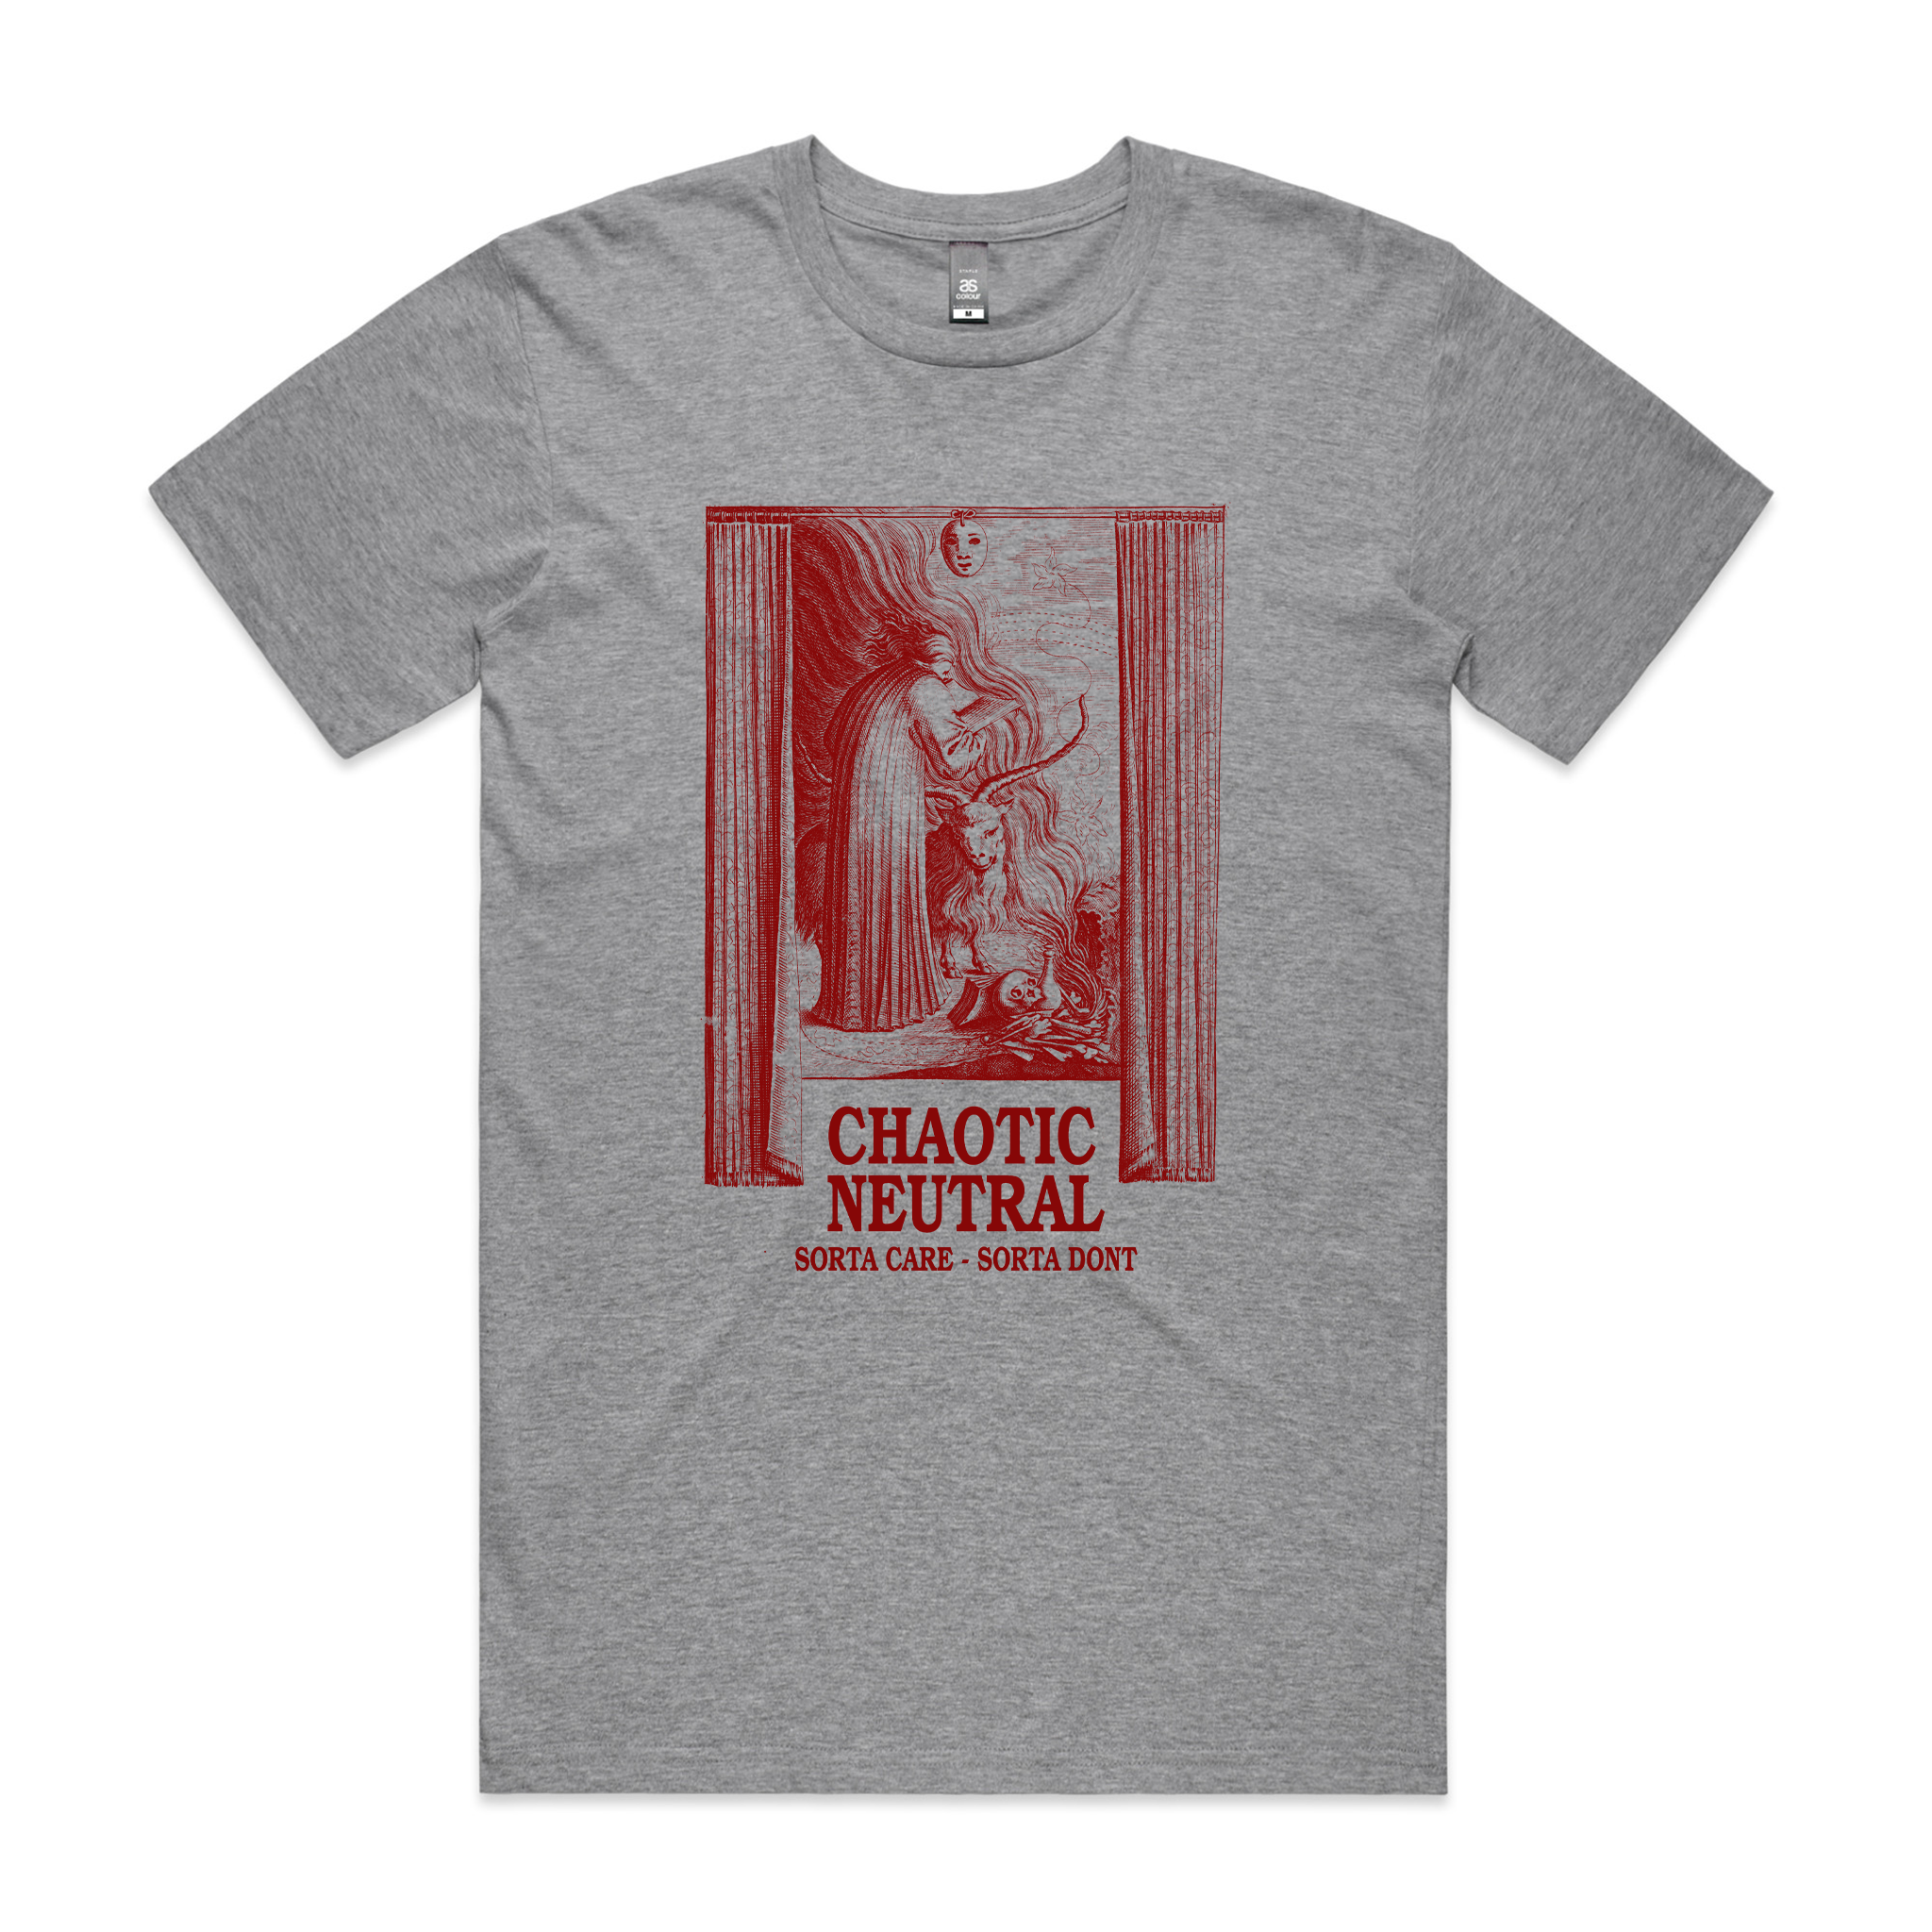 Chaotic Neutral Tee